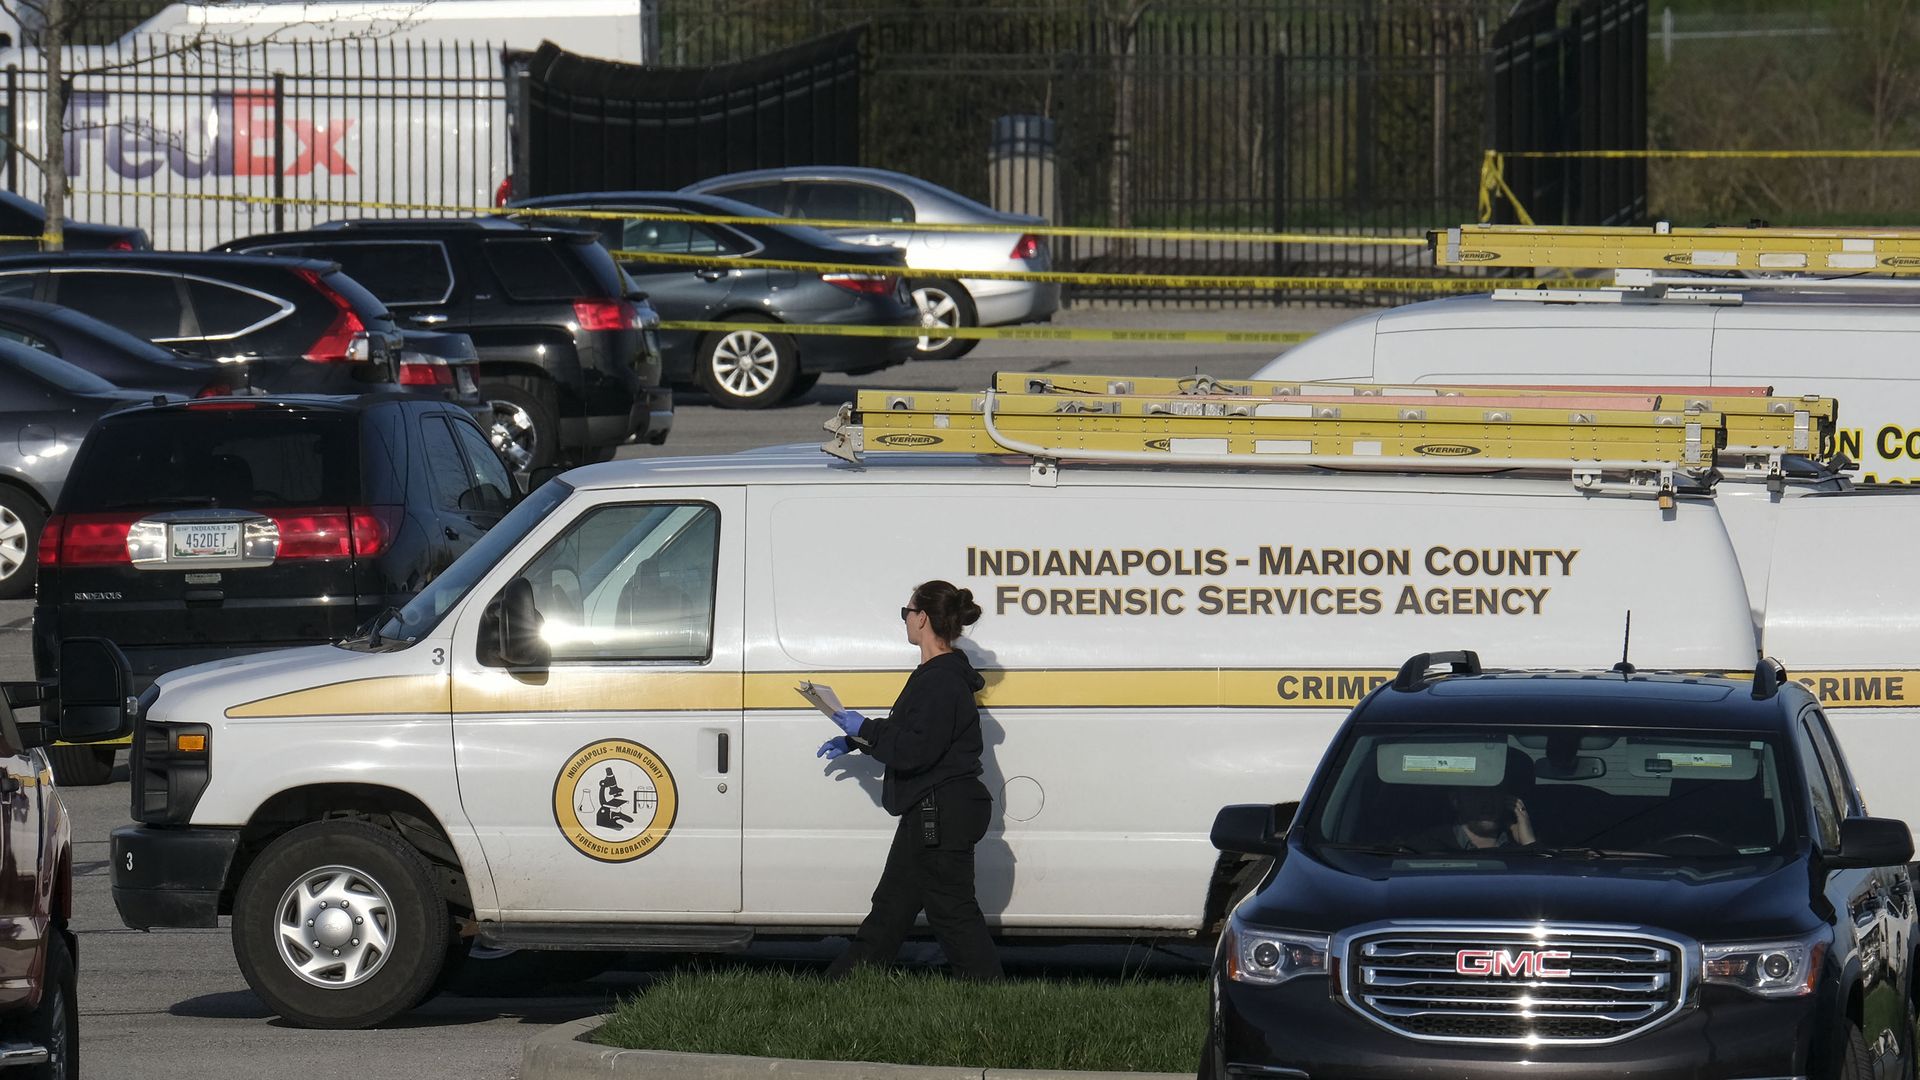  Marion County Forensic Services vehicles are parked at the site of a mass shooting at a FedEx facility in Indianapolis, Indiana on April 16